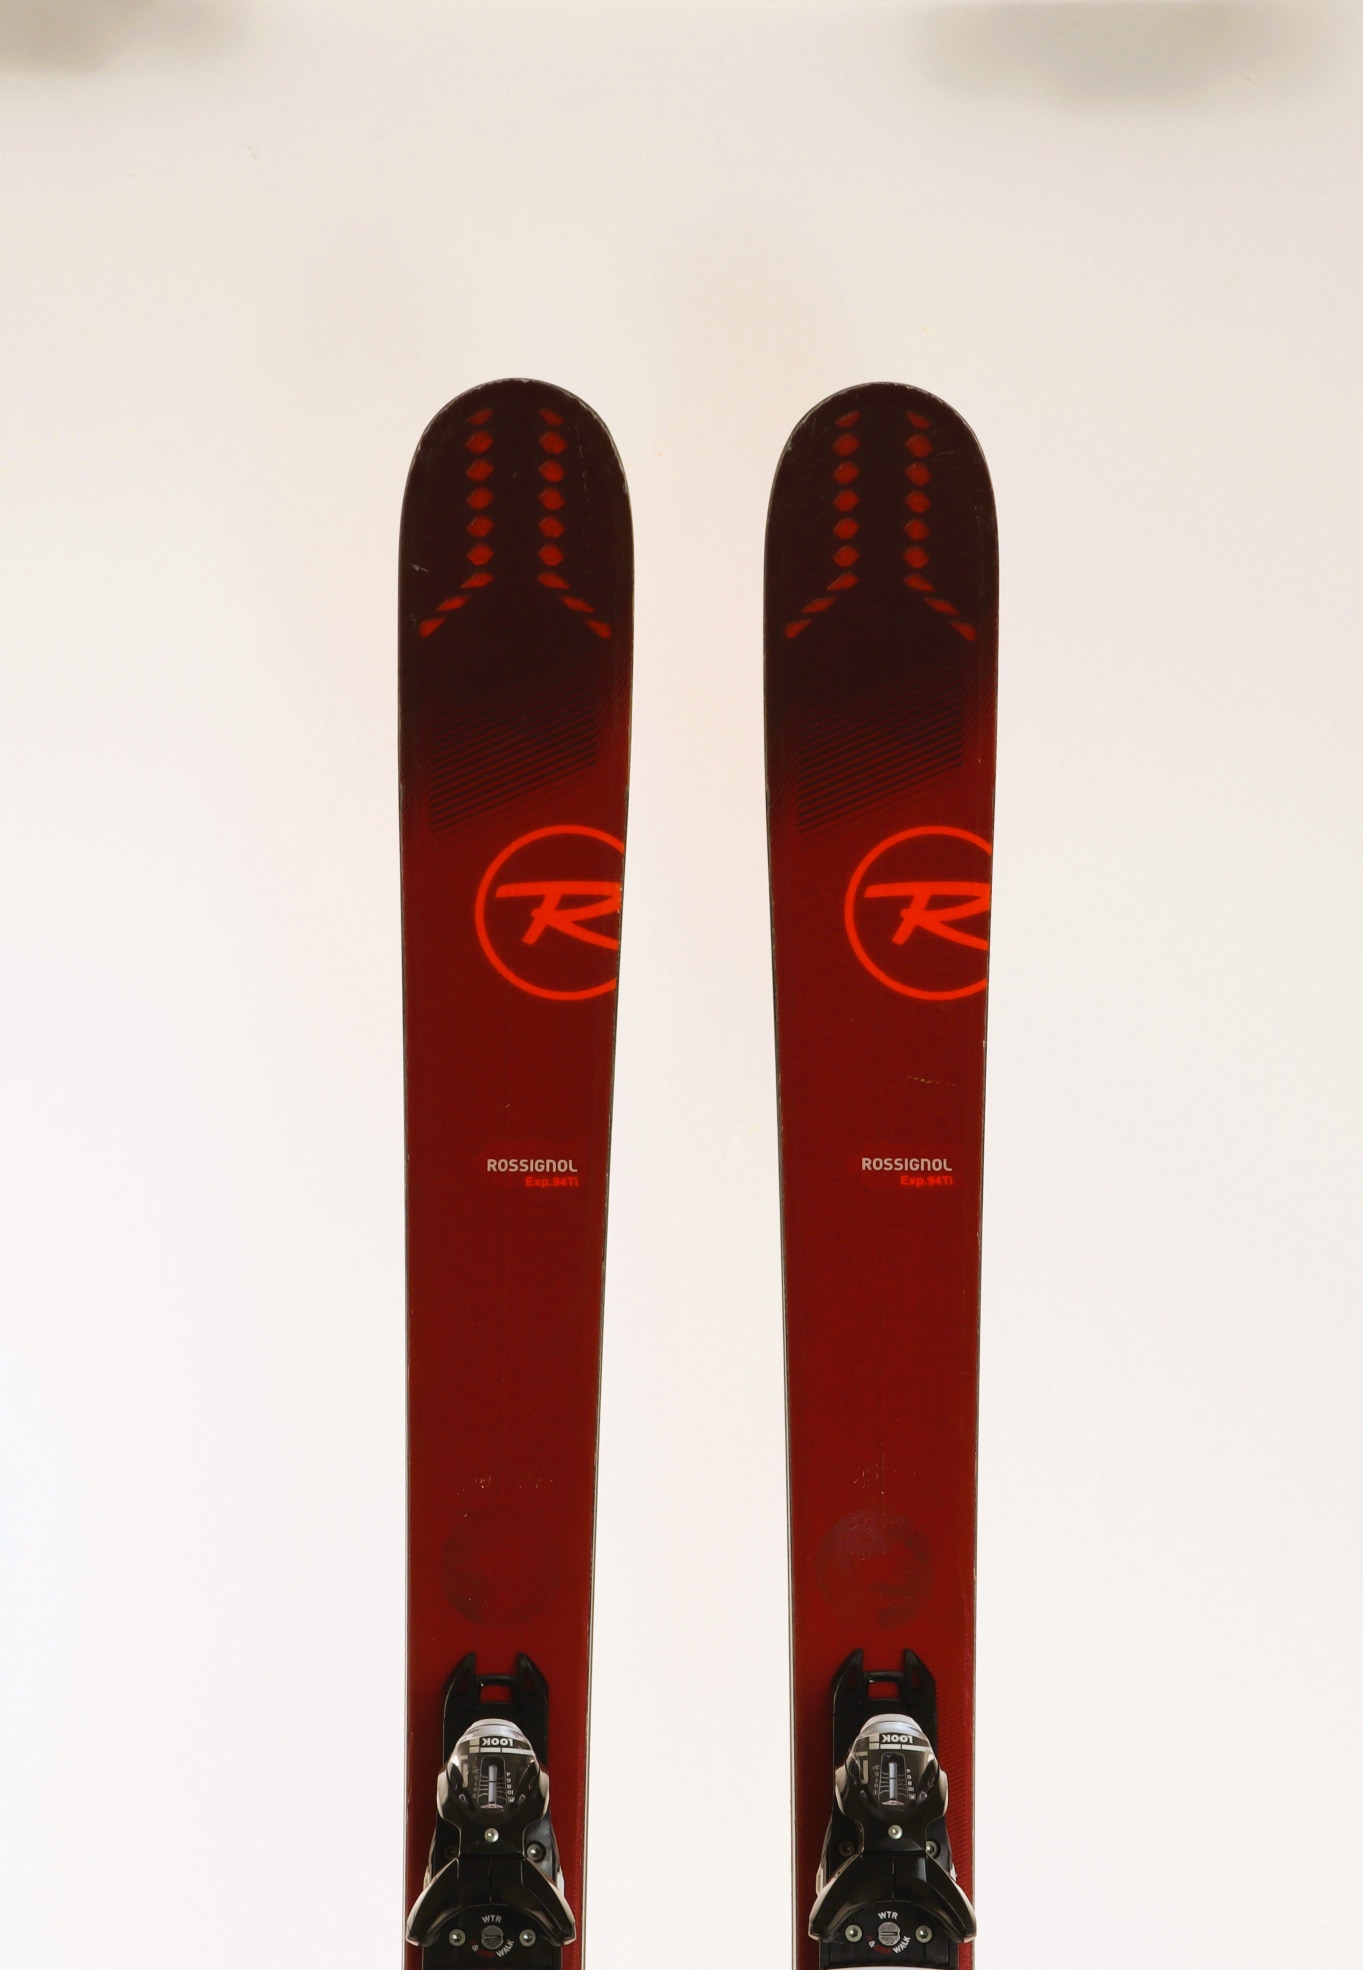 Used 2020 Rossignol Experience 94 Ti Demo Ski with Look SPX 12 Bindings Size 180 (Option 231324)